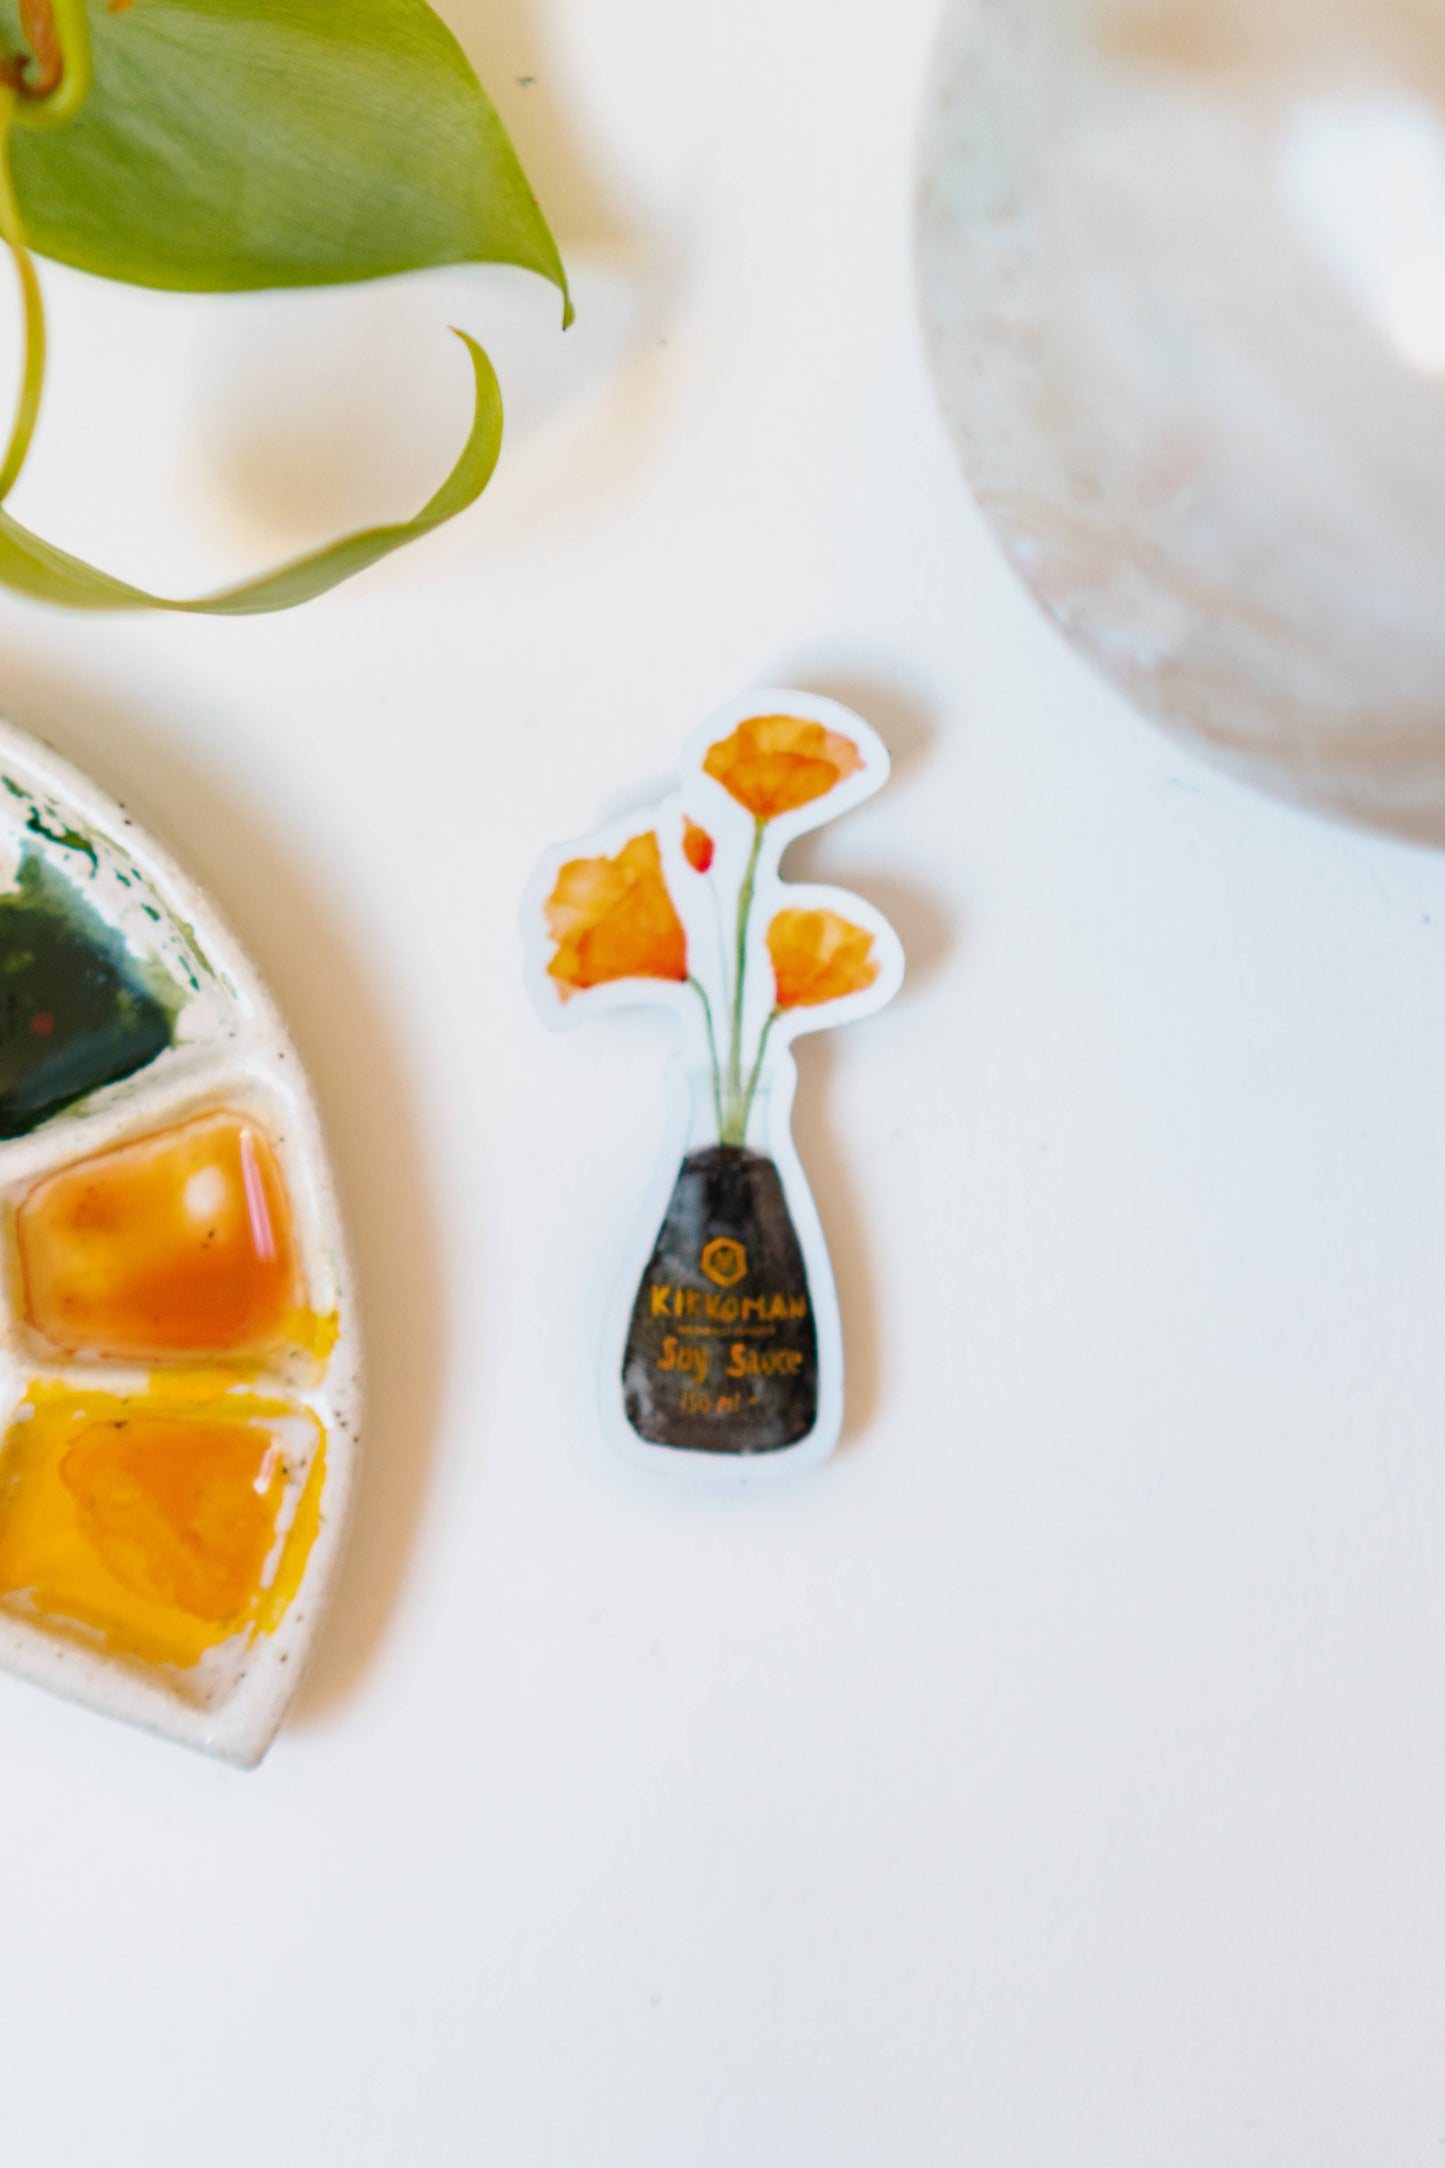 California Poppies in Soy Sauce Sticker